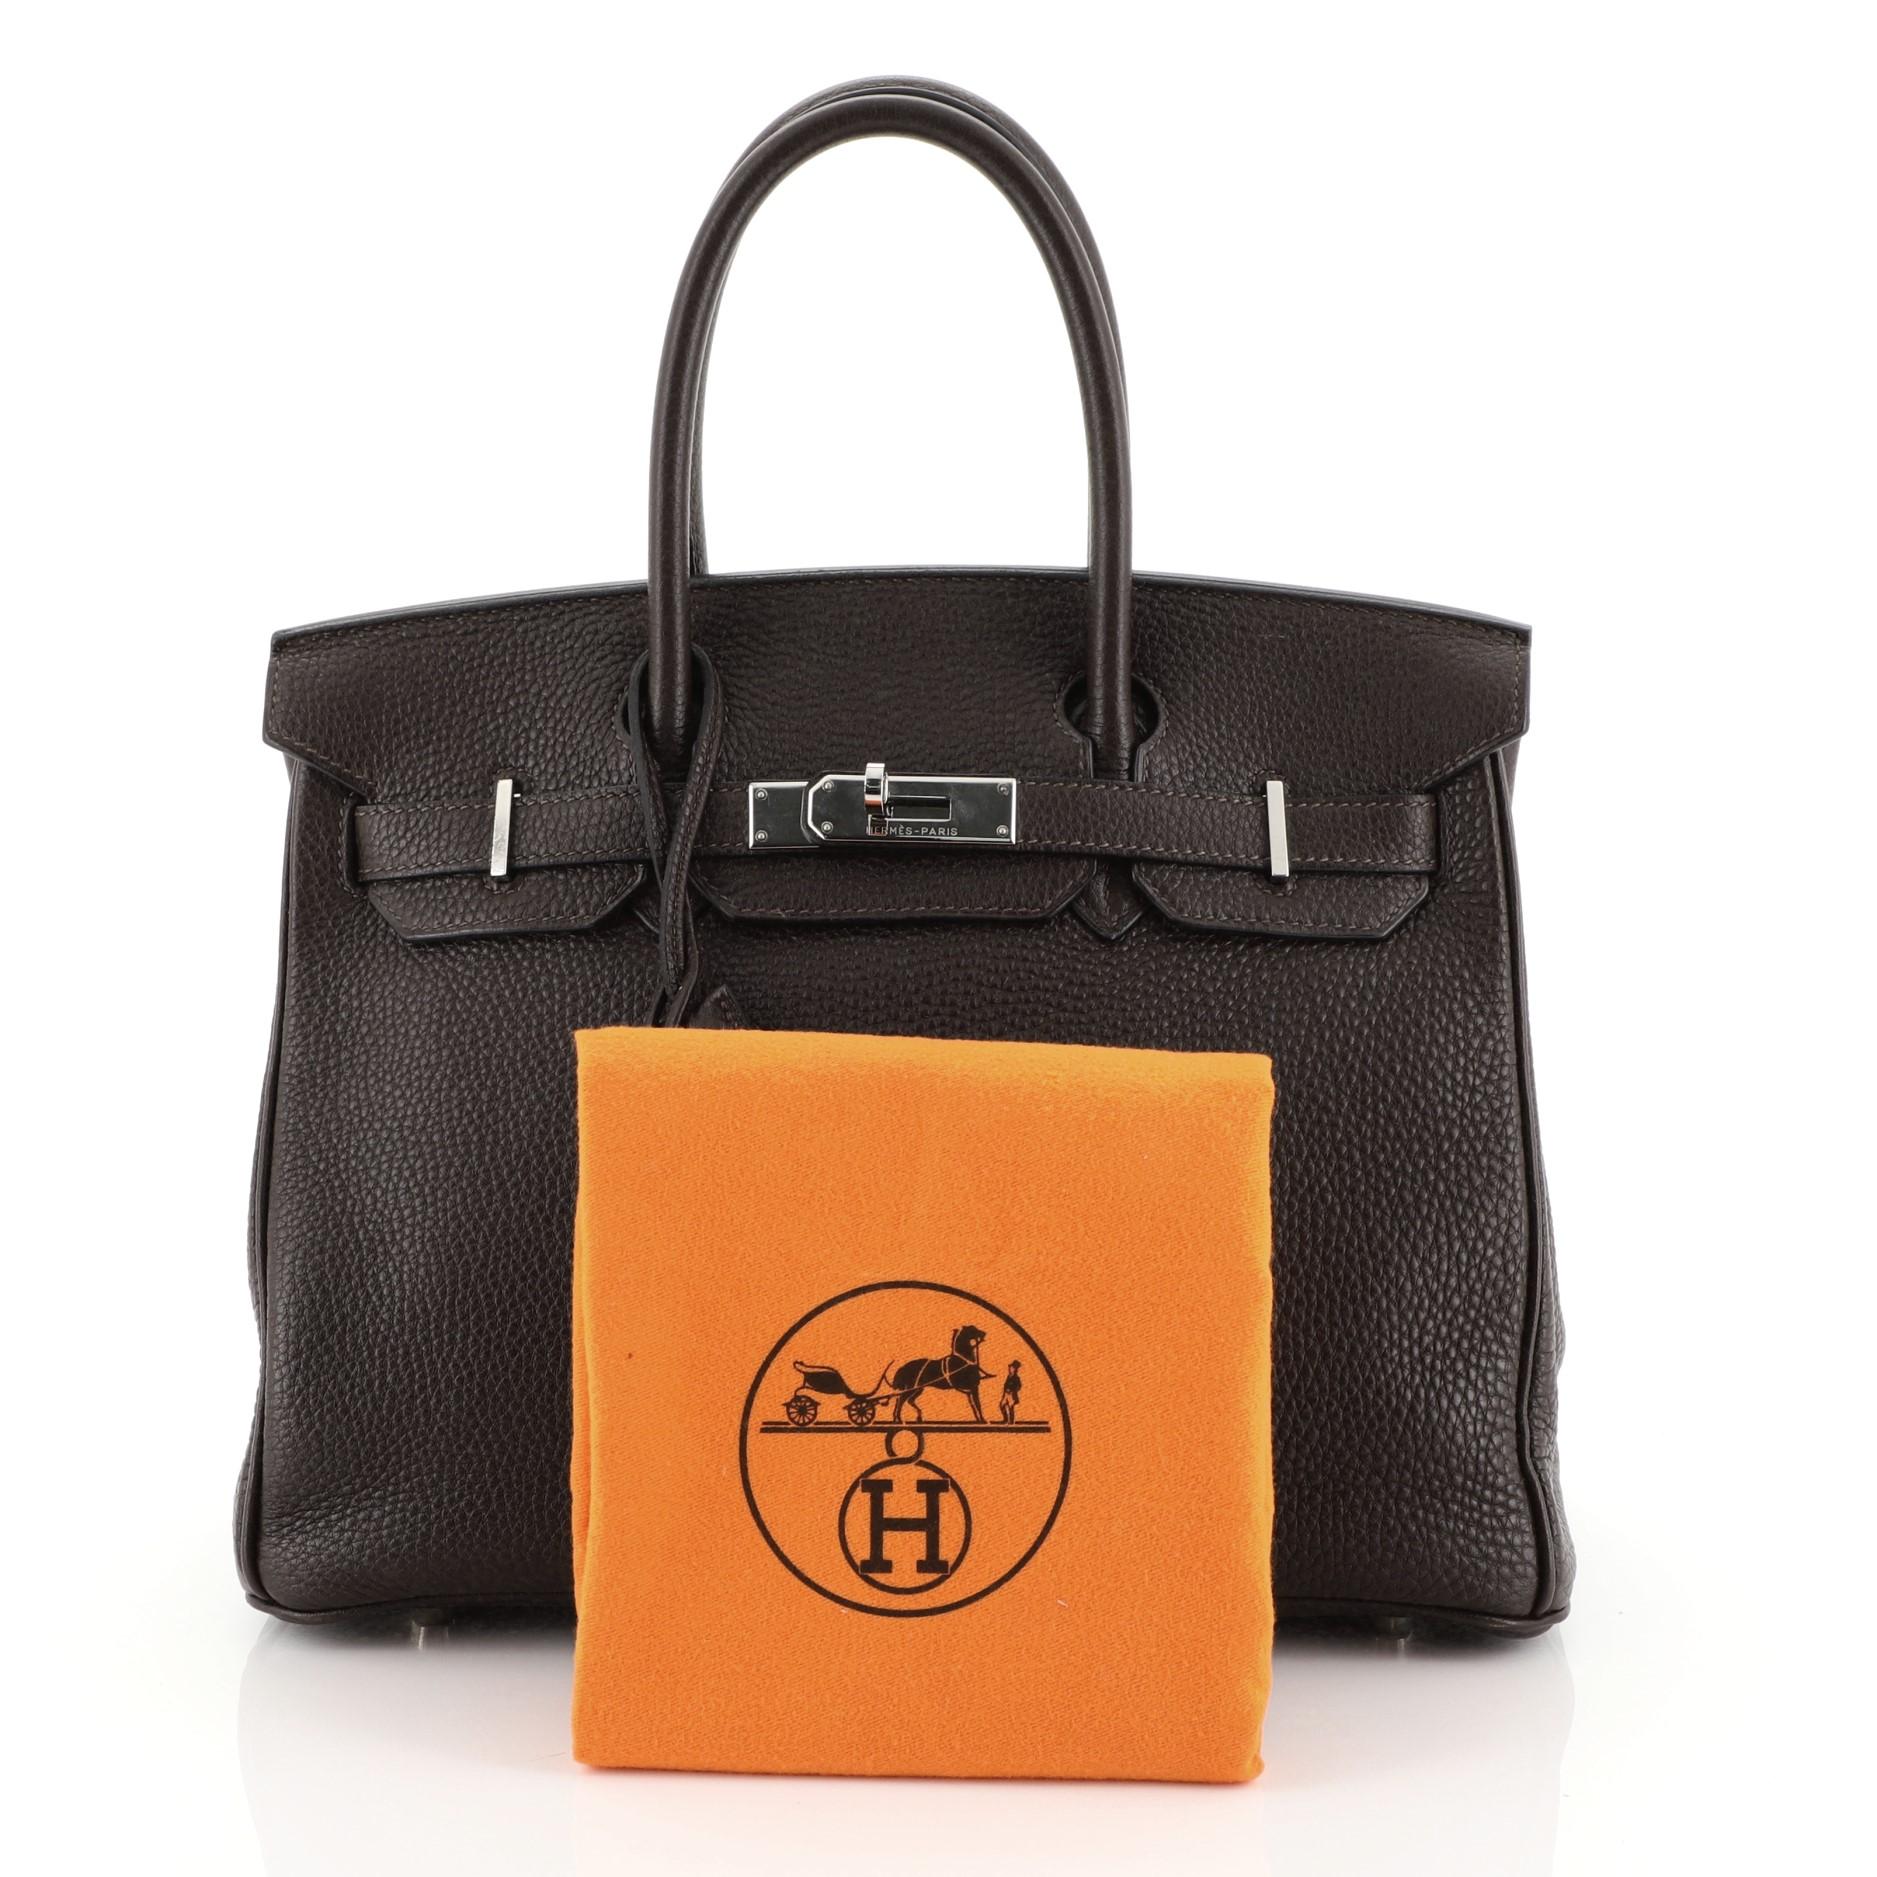 This Hermes Birkin Handbag Cafe Clemence with Palladium Hardware 30, crafted in Cafe brown clemence leather, features dual rolled handles, front flap, and palladium hardware. Its turn-lock closure opens to a Cafe brown leather interior with slip and